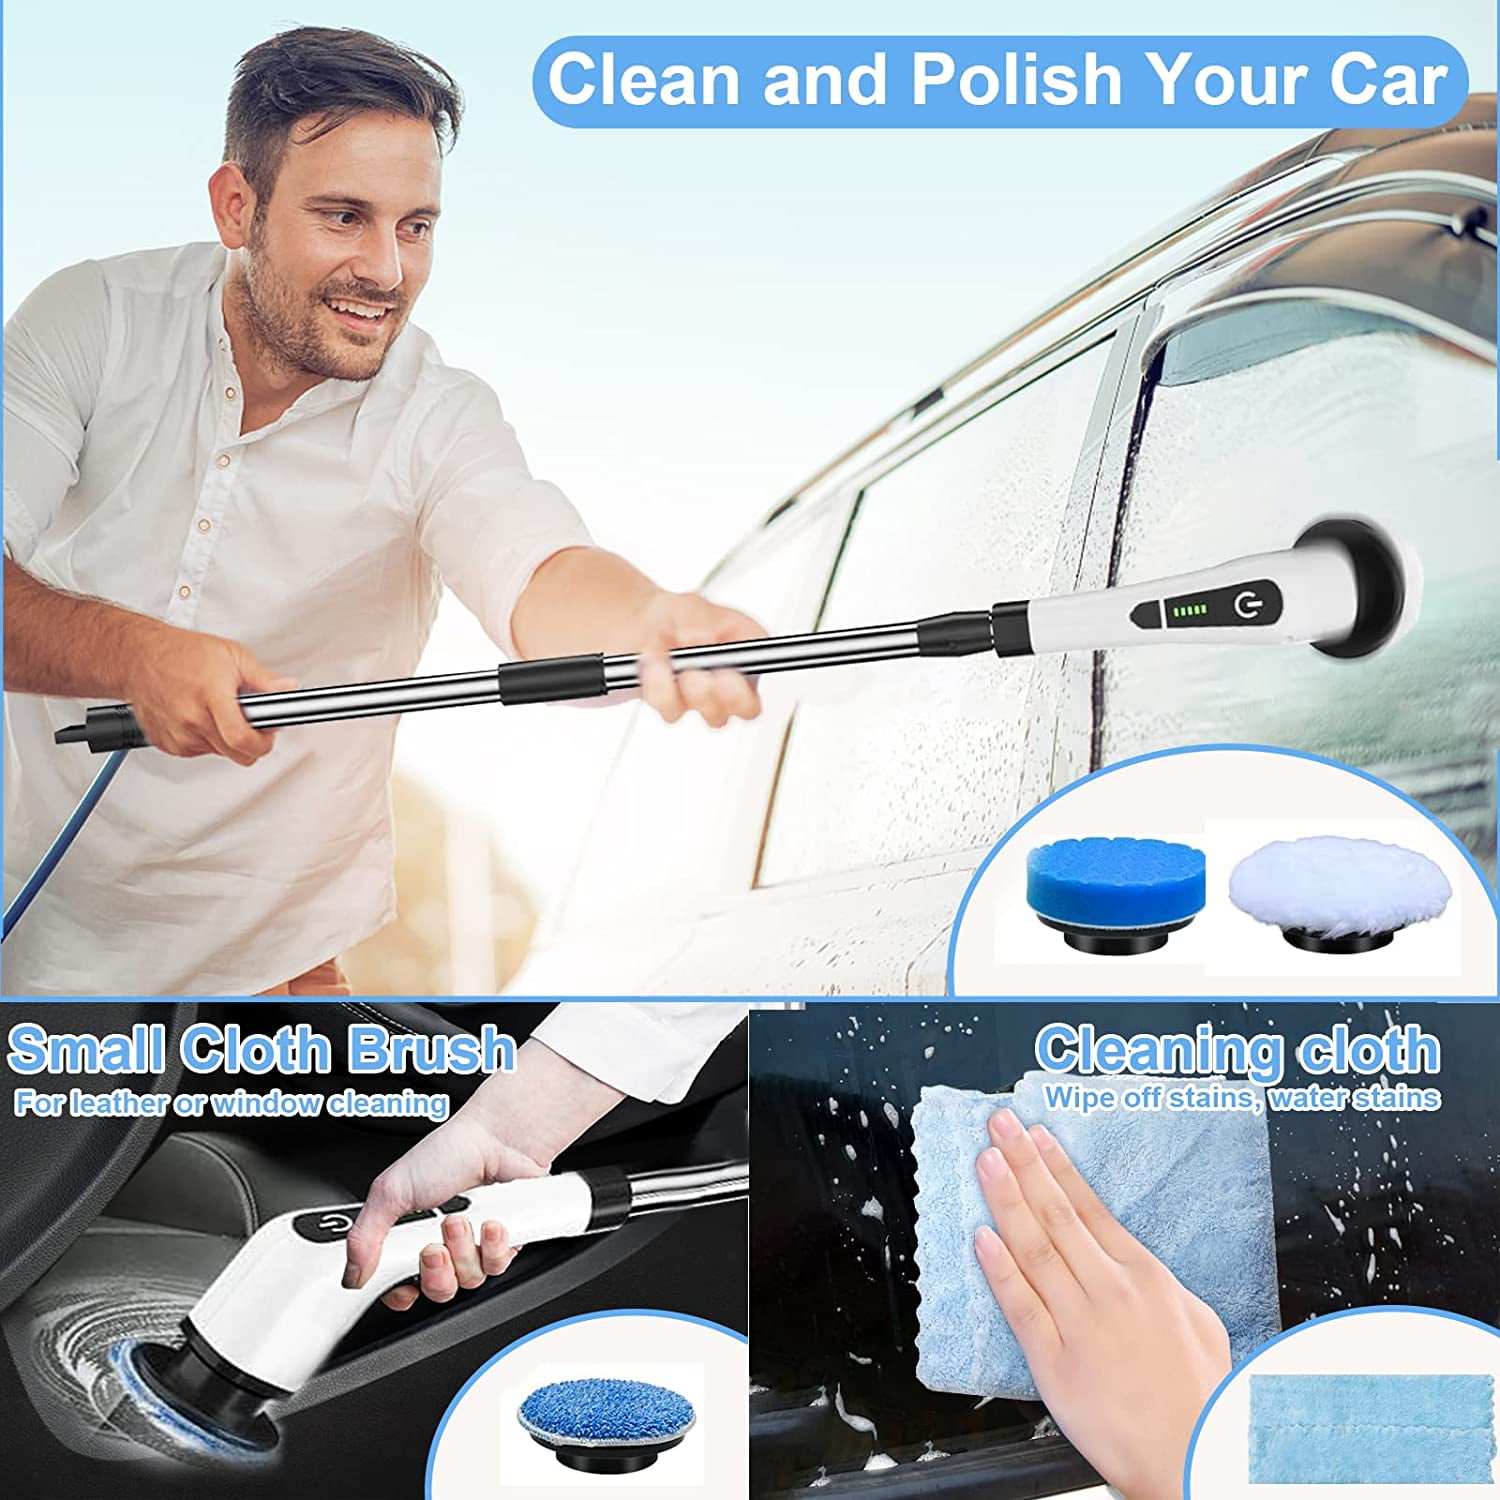 7 in1 Electric Cleaning Tool Magic Brush Pro– PSAUD